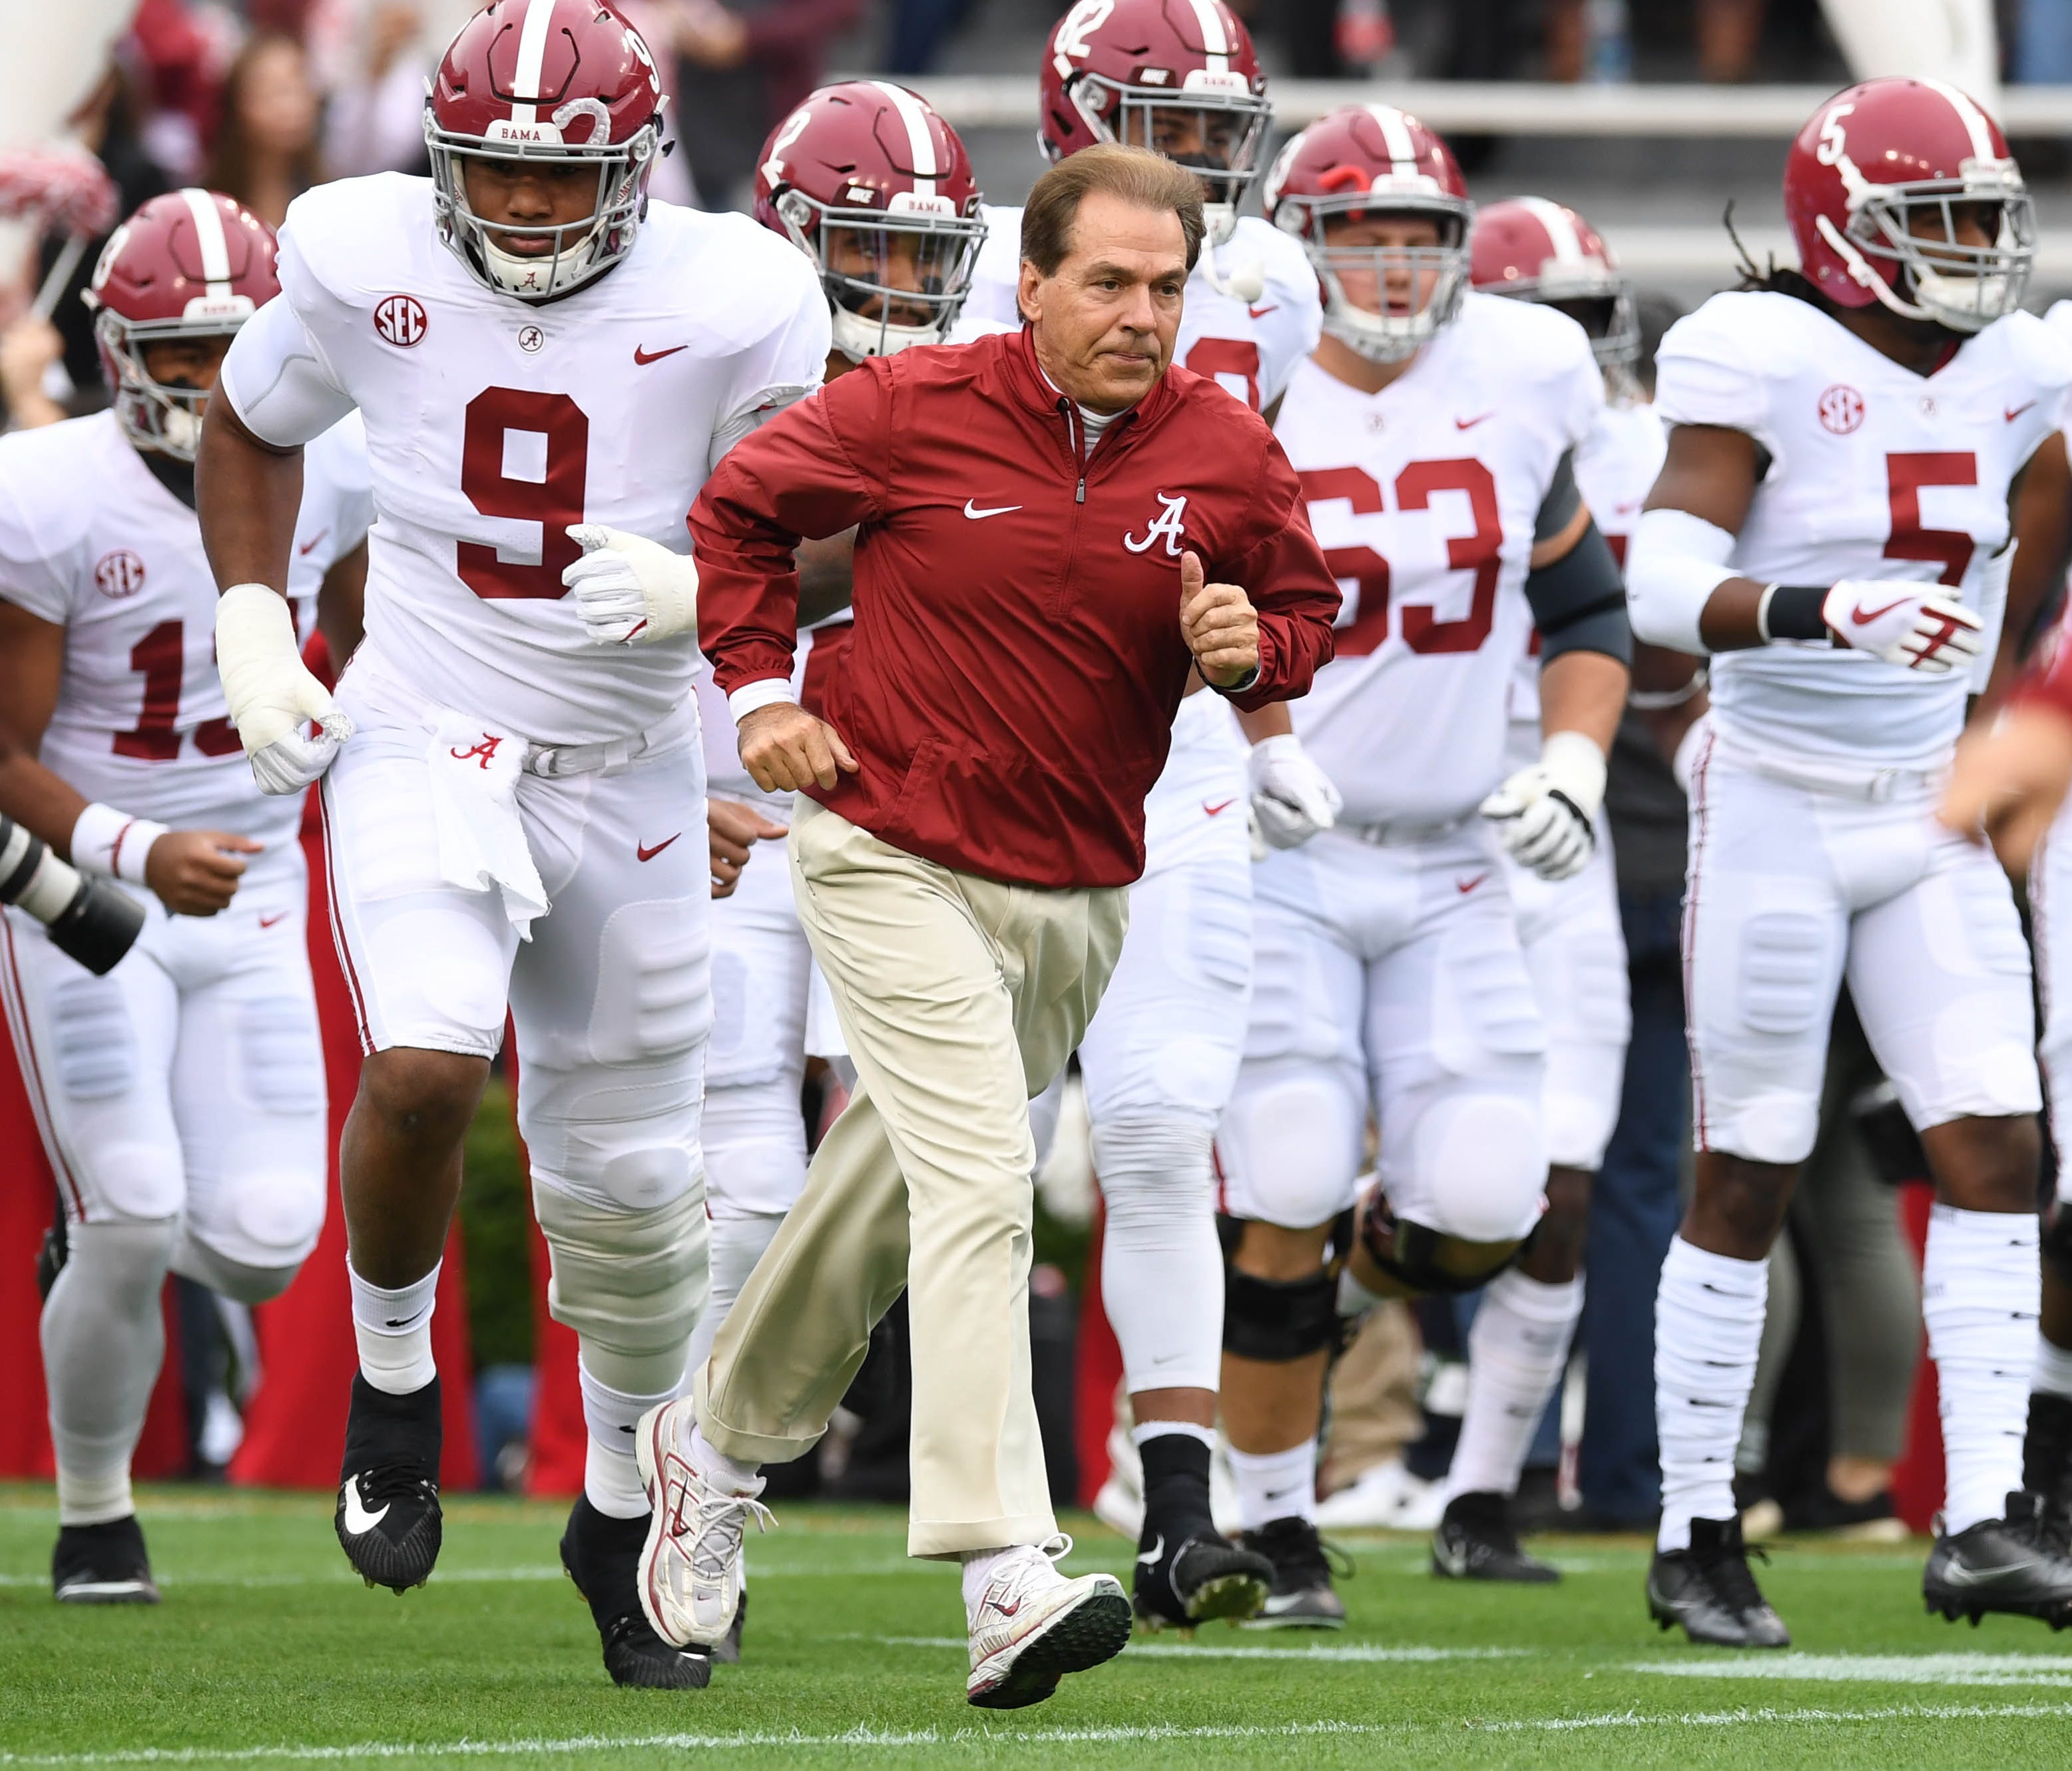 Alabama coach Nick Saban runs on the field with his players before their game against Auburn.